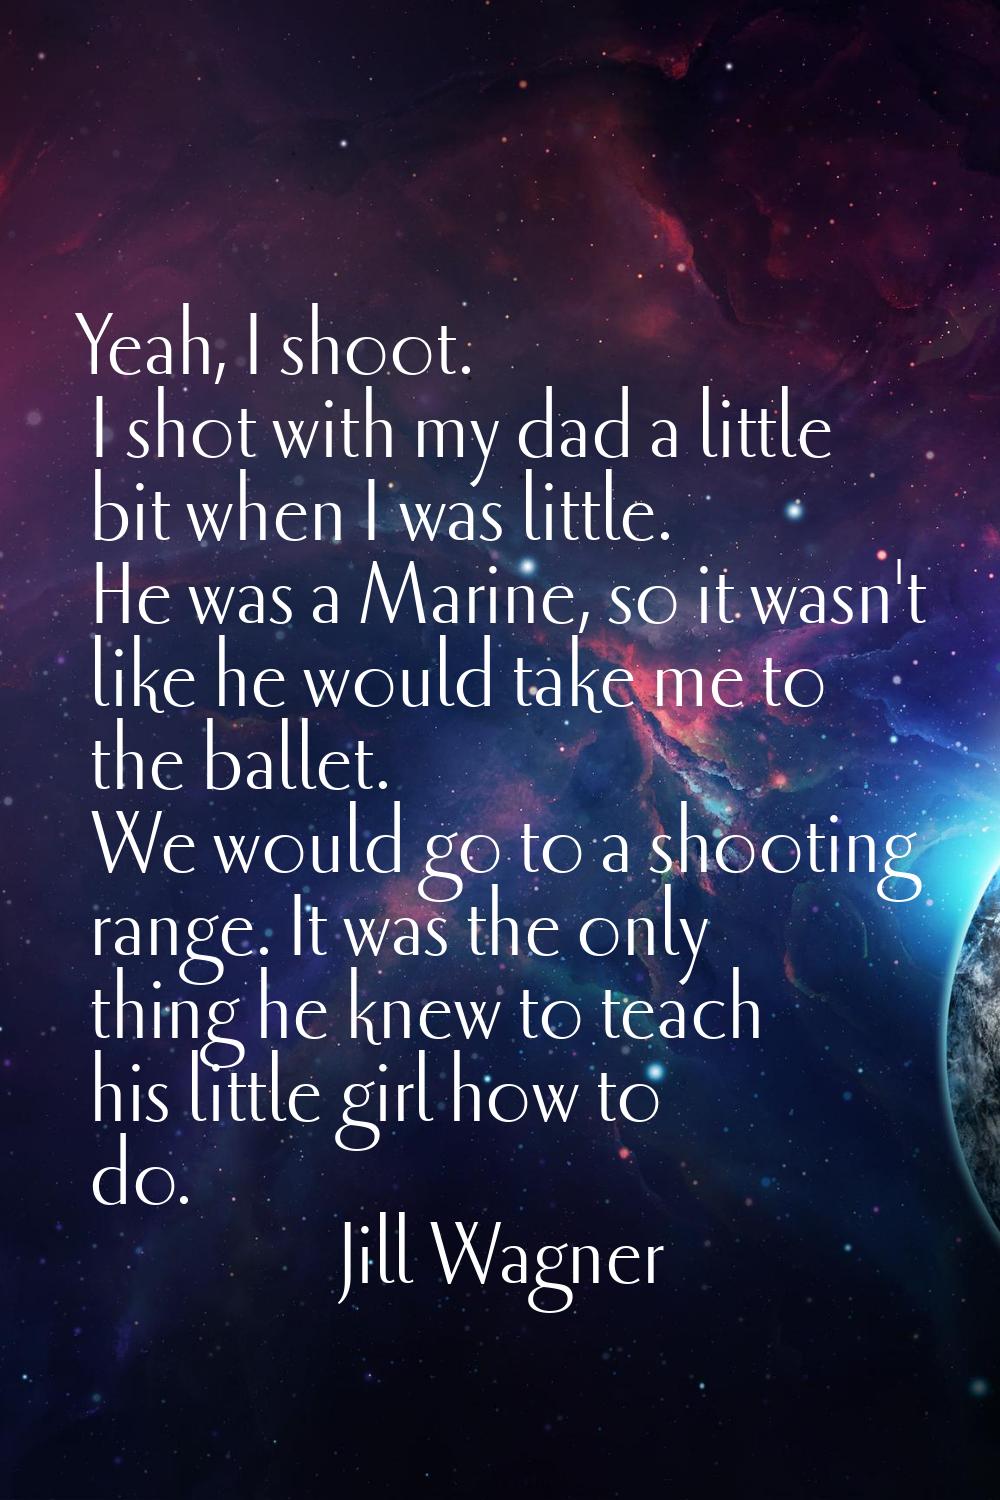 Yeah, I shoot. I shot with my dad a little bit when I was little. He was a Marine, so it wasn't lik